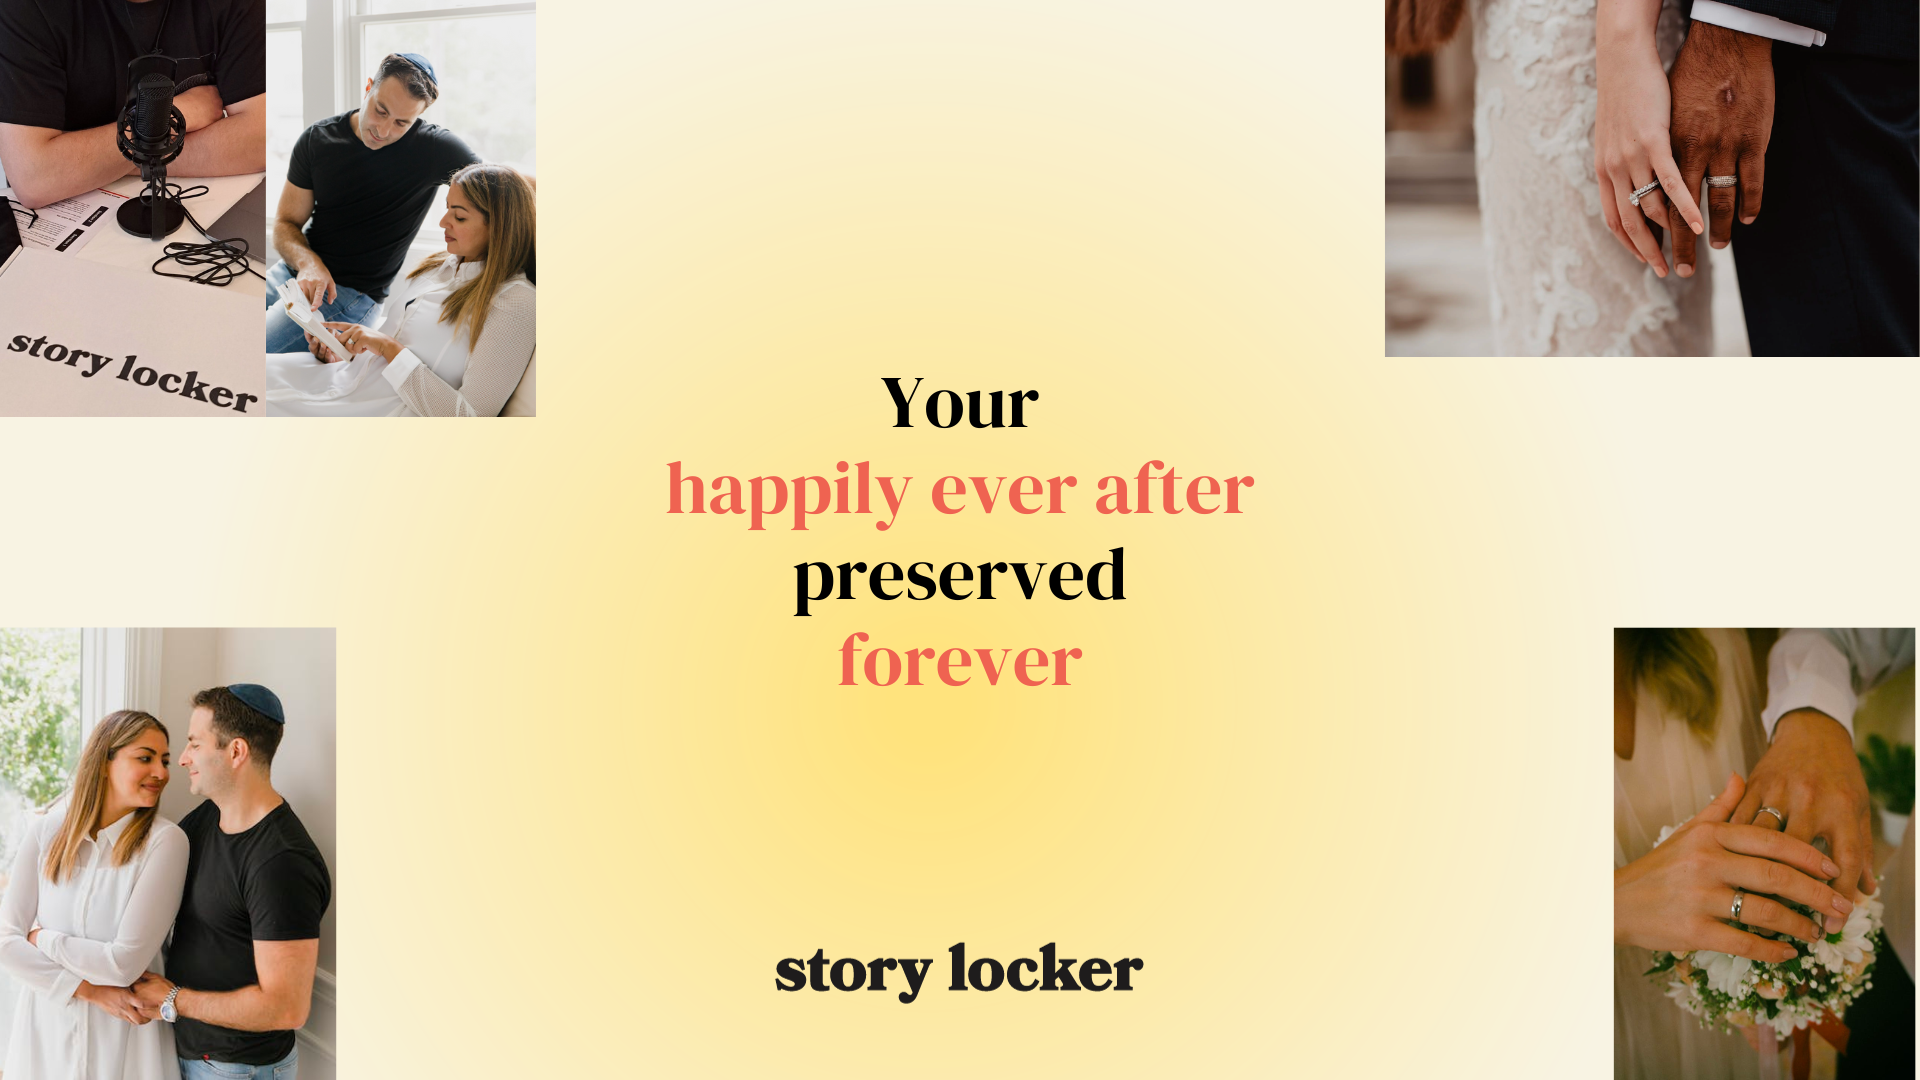  YOUR HAPPILY EVER AFTER PRESERVED FOREVER printed by Story Locker with meaningful photos surrounding it.  